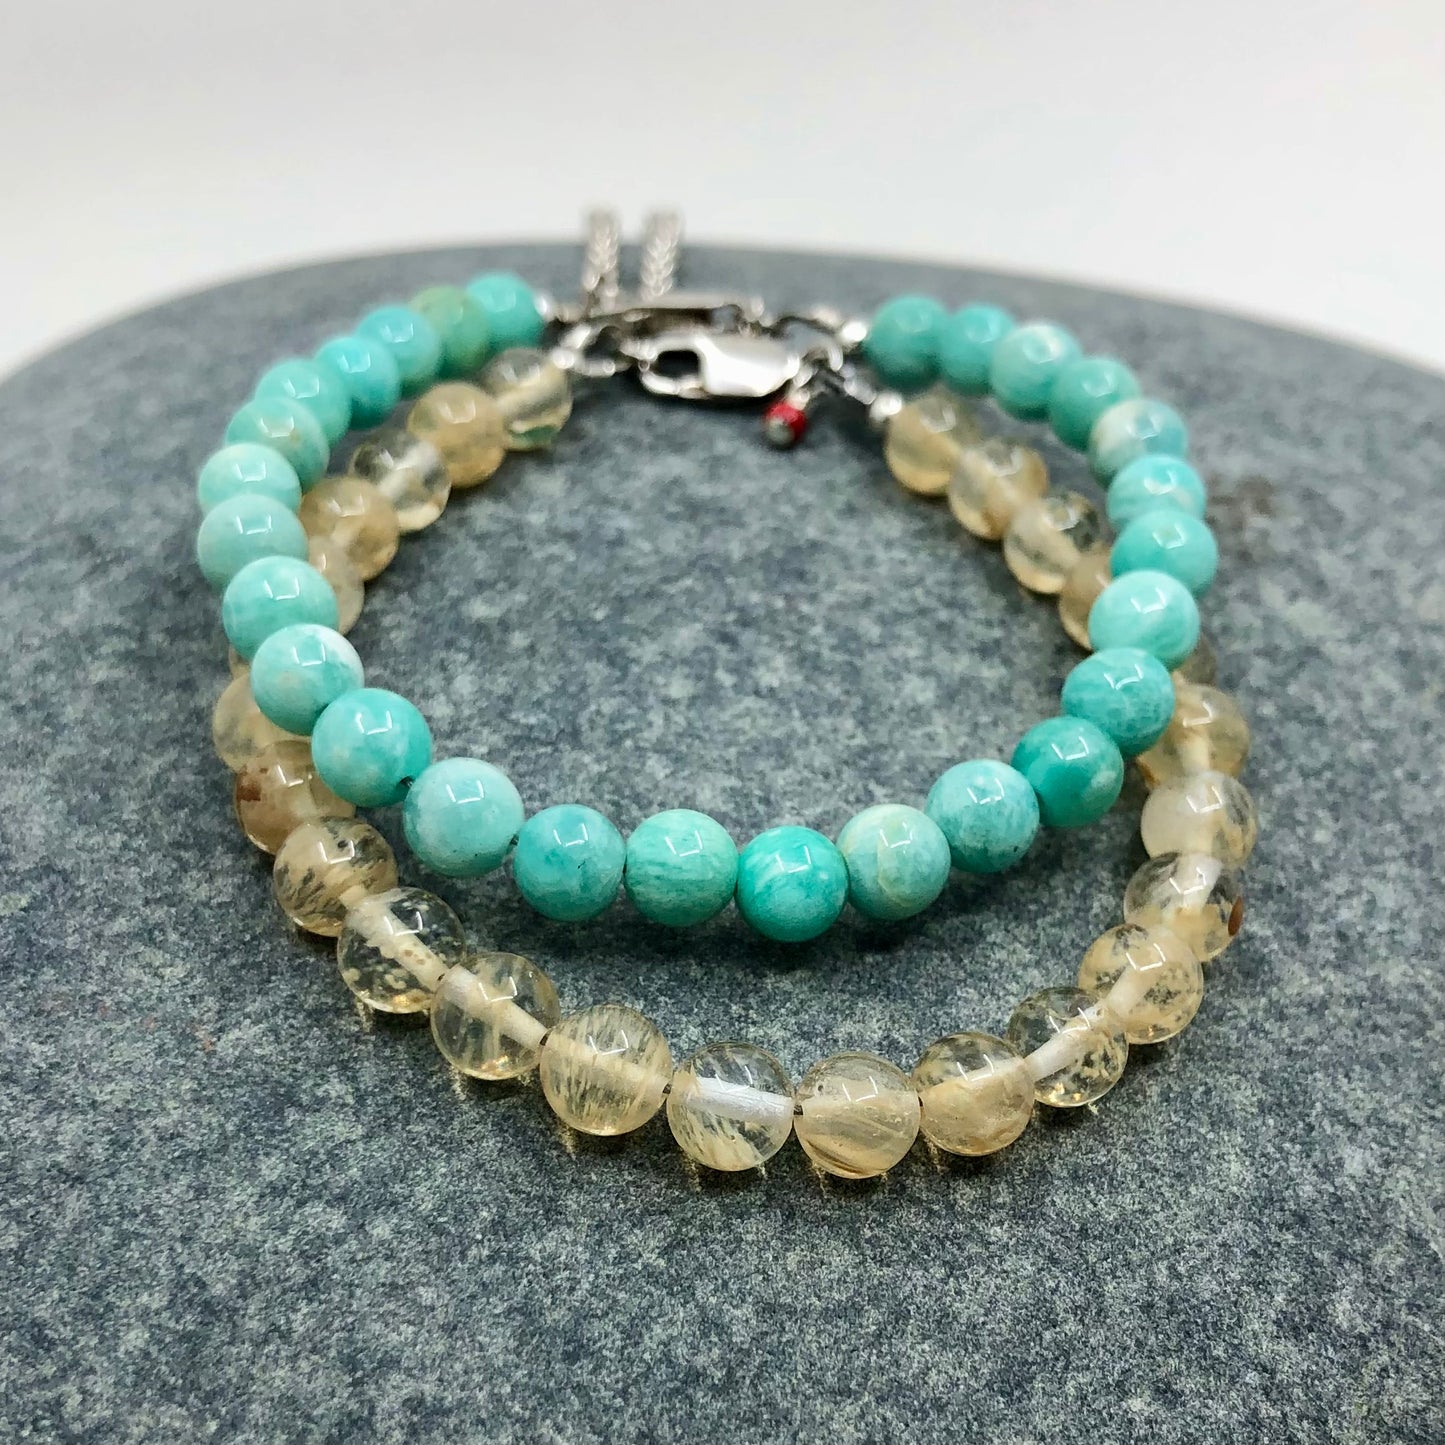 6mm Handcrafted Gemstone Beaded Bracelets with Sterling Silver Clasp